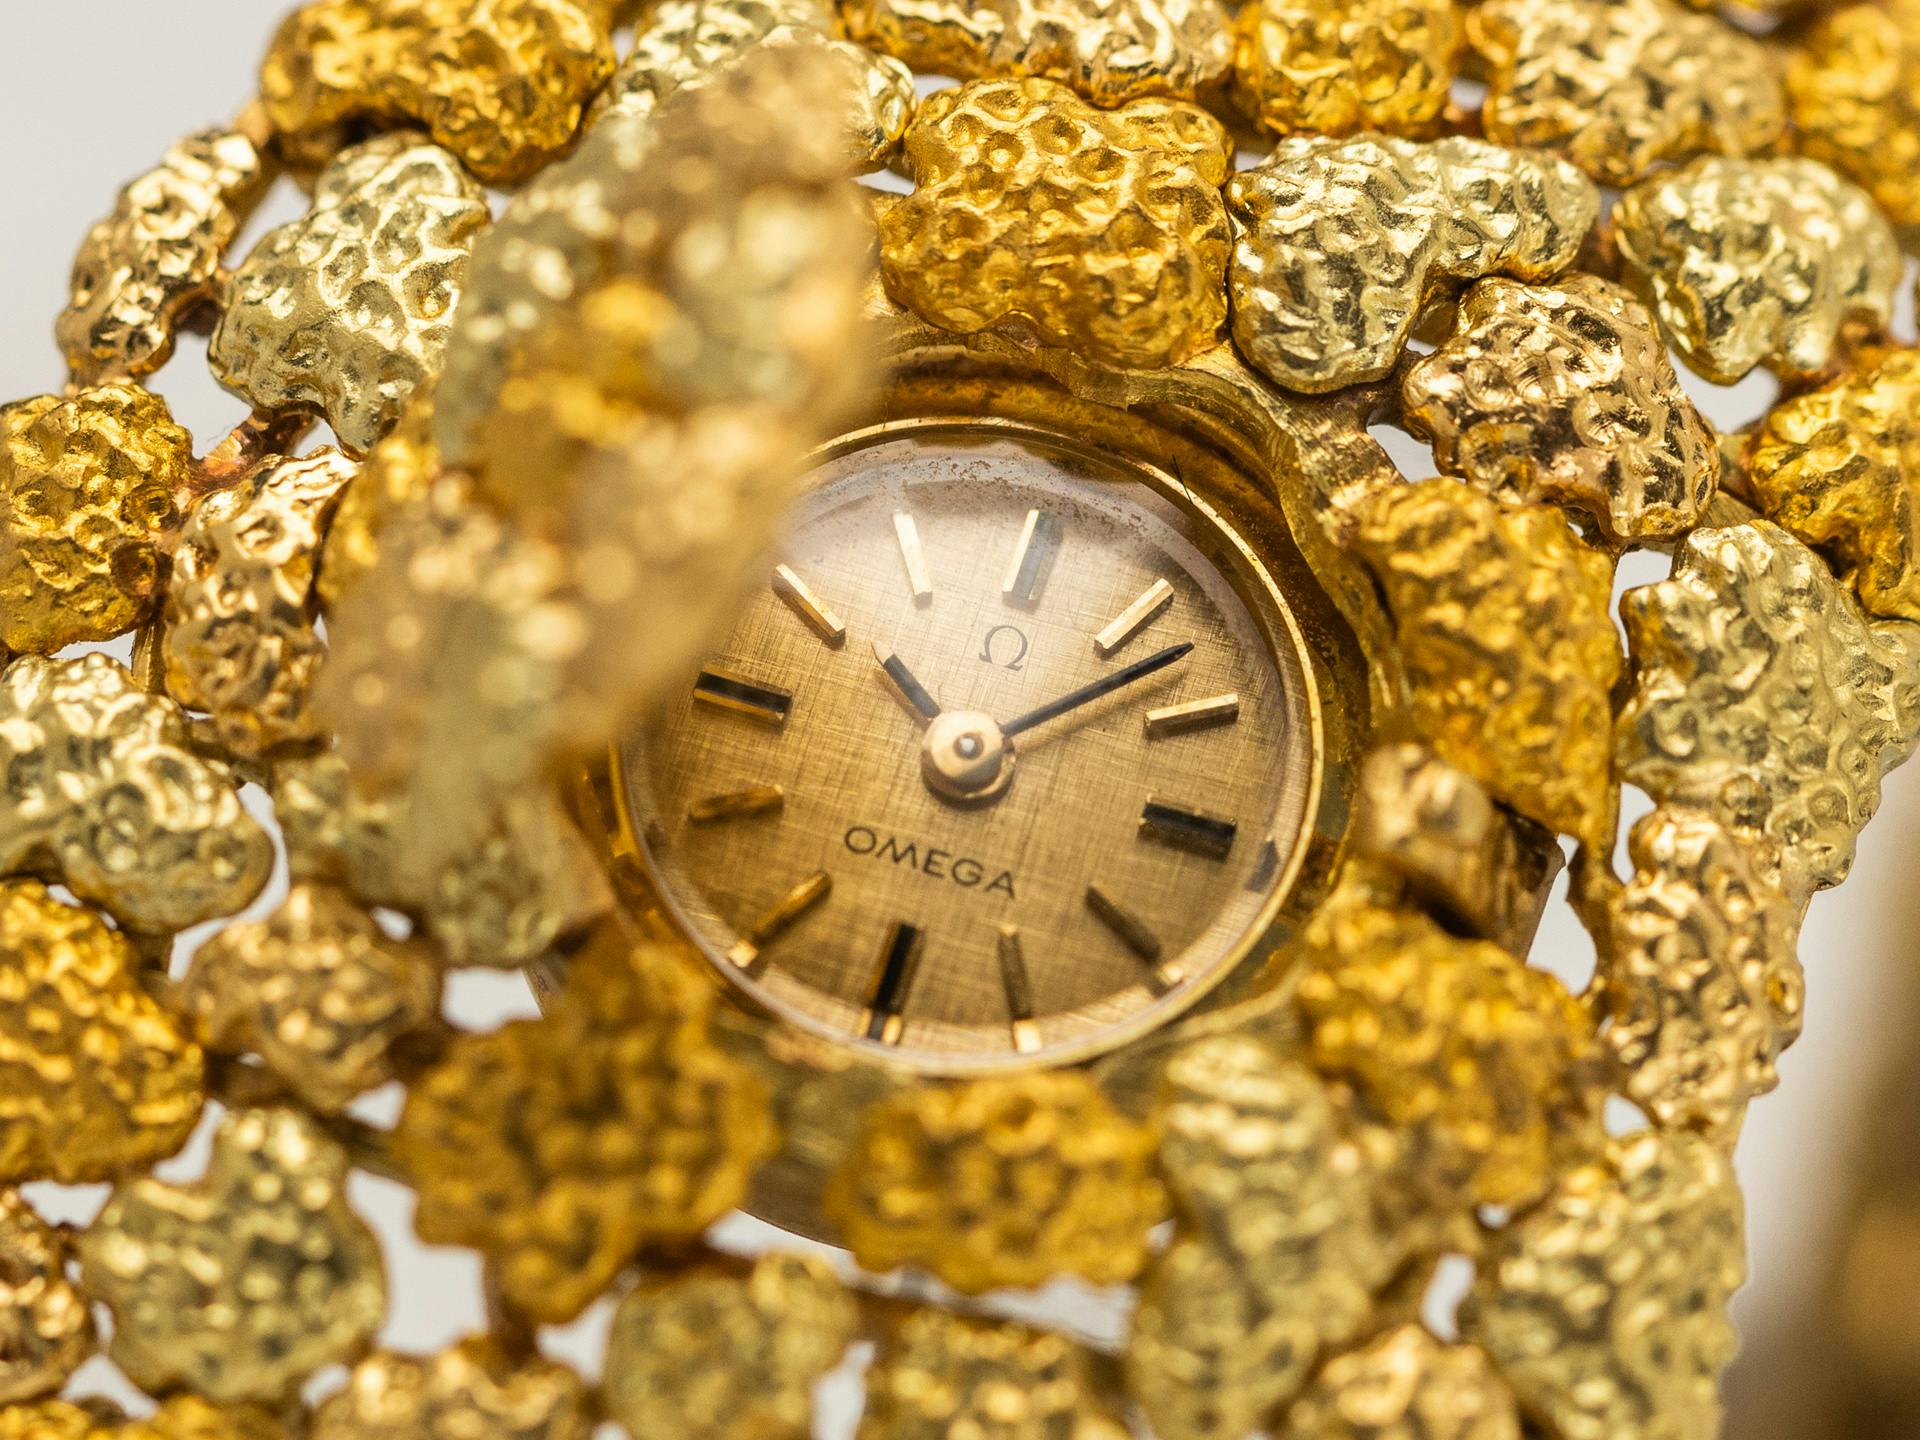 A gold Omega ladies cuff watch entirely made up of small gold nuggets with a tiny hidden watch face in the centre